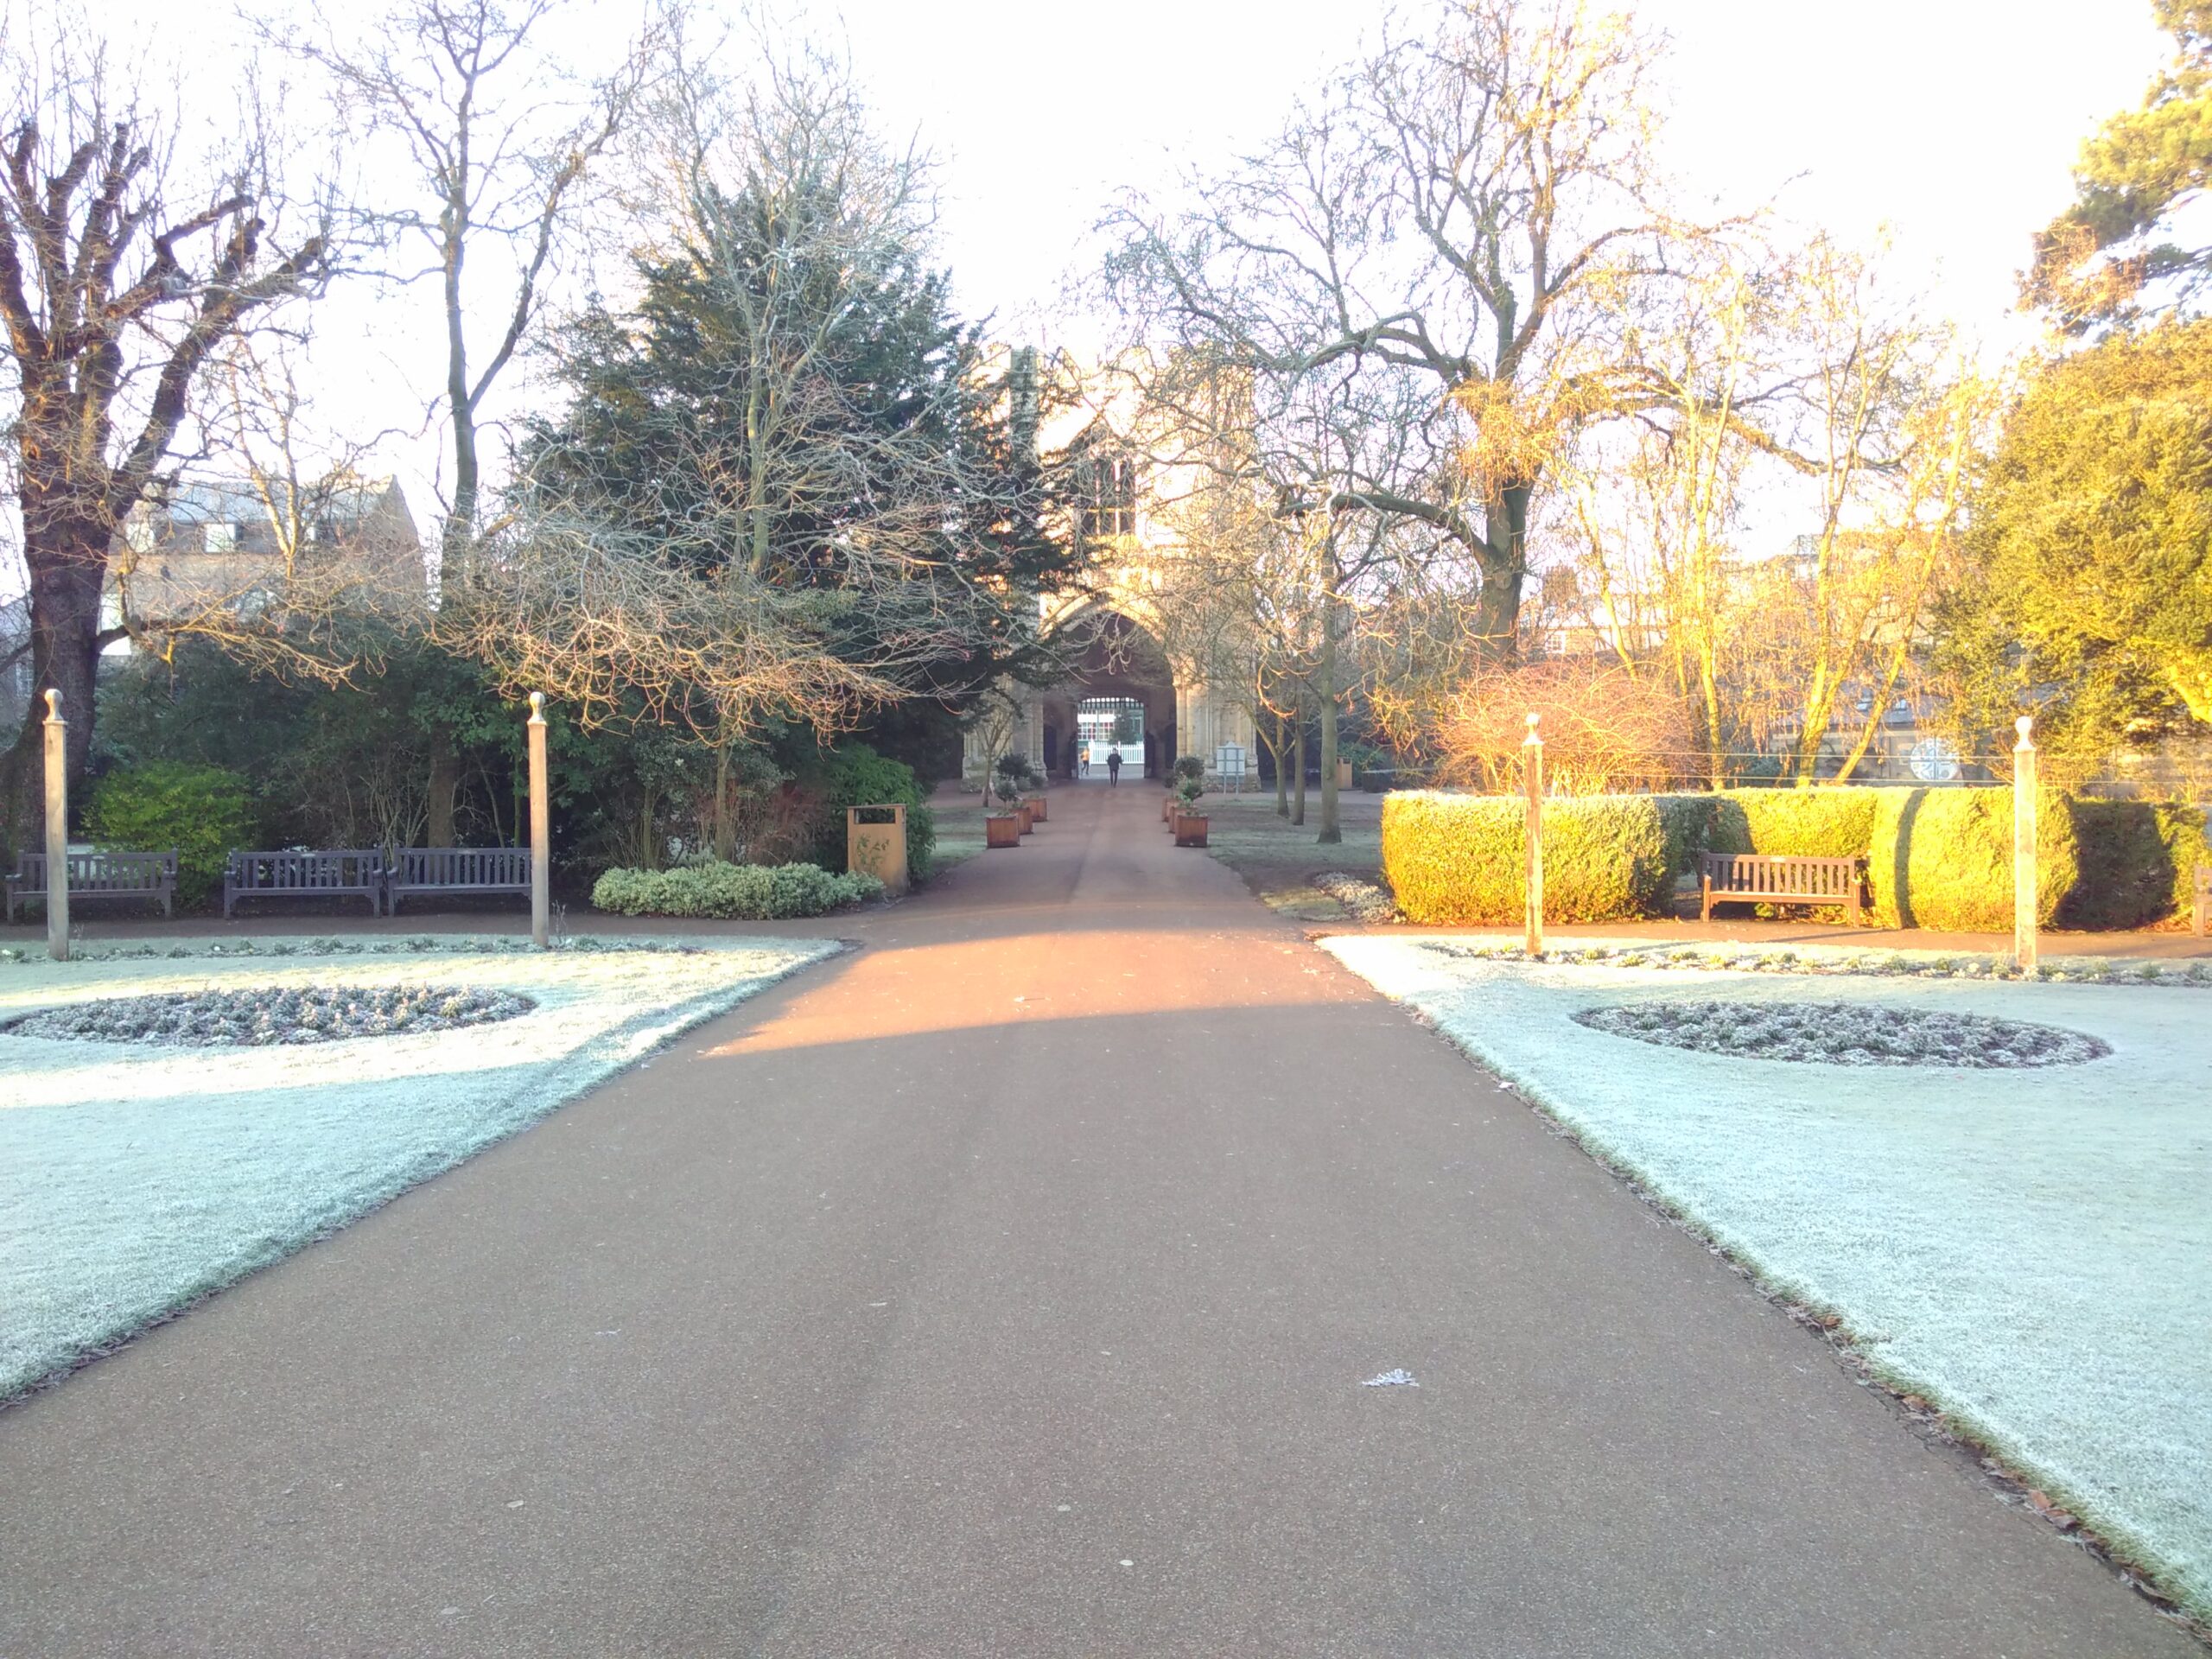 A path between frost-covered park lawns towards a mediavel stone tower beyond hedges and trees.